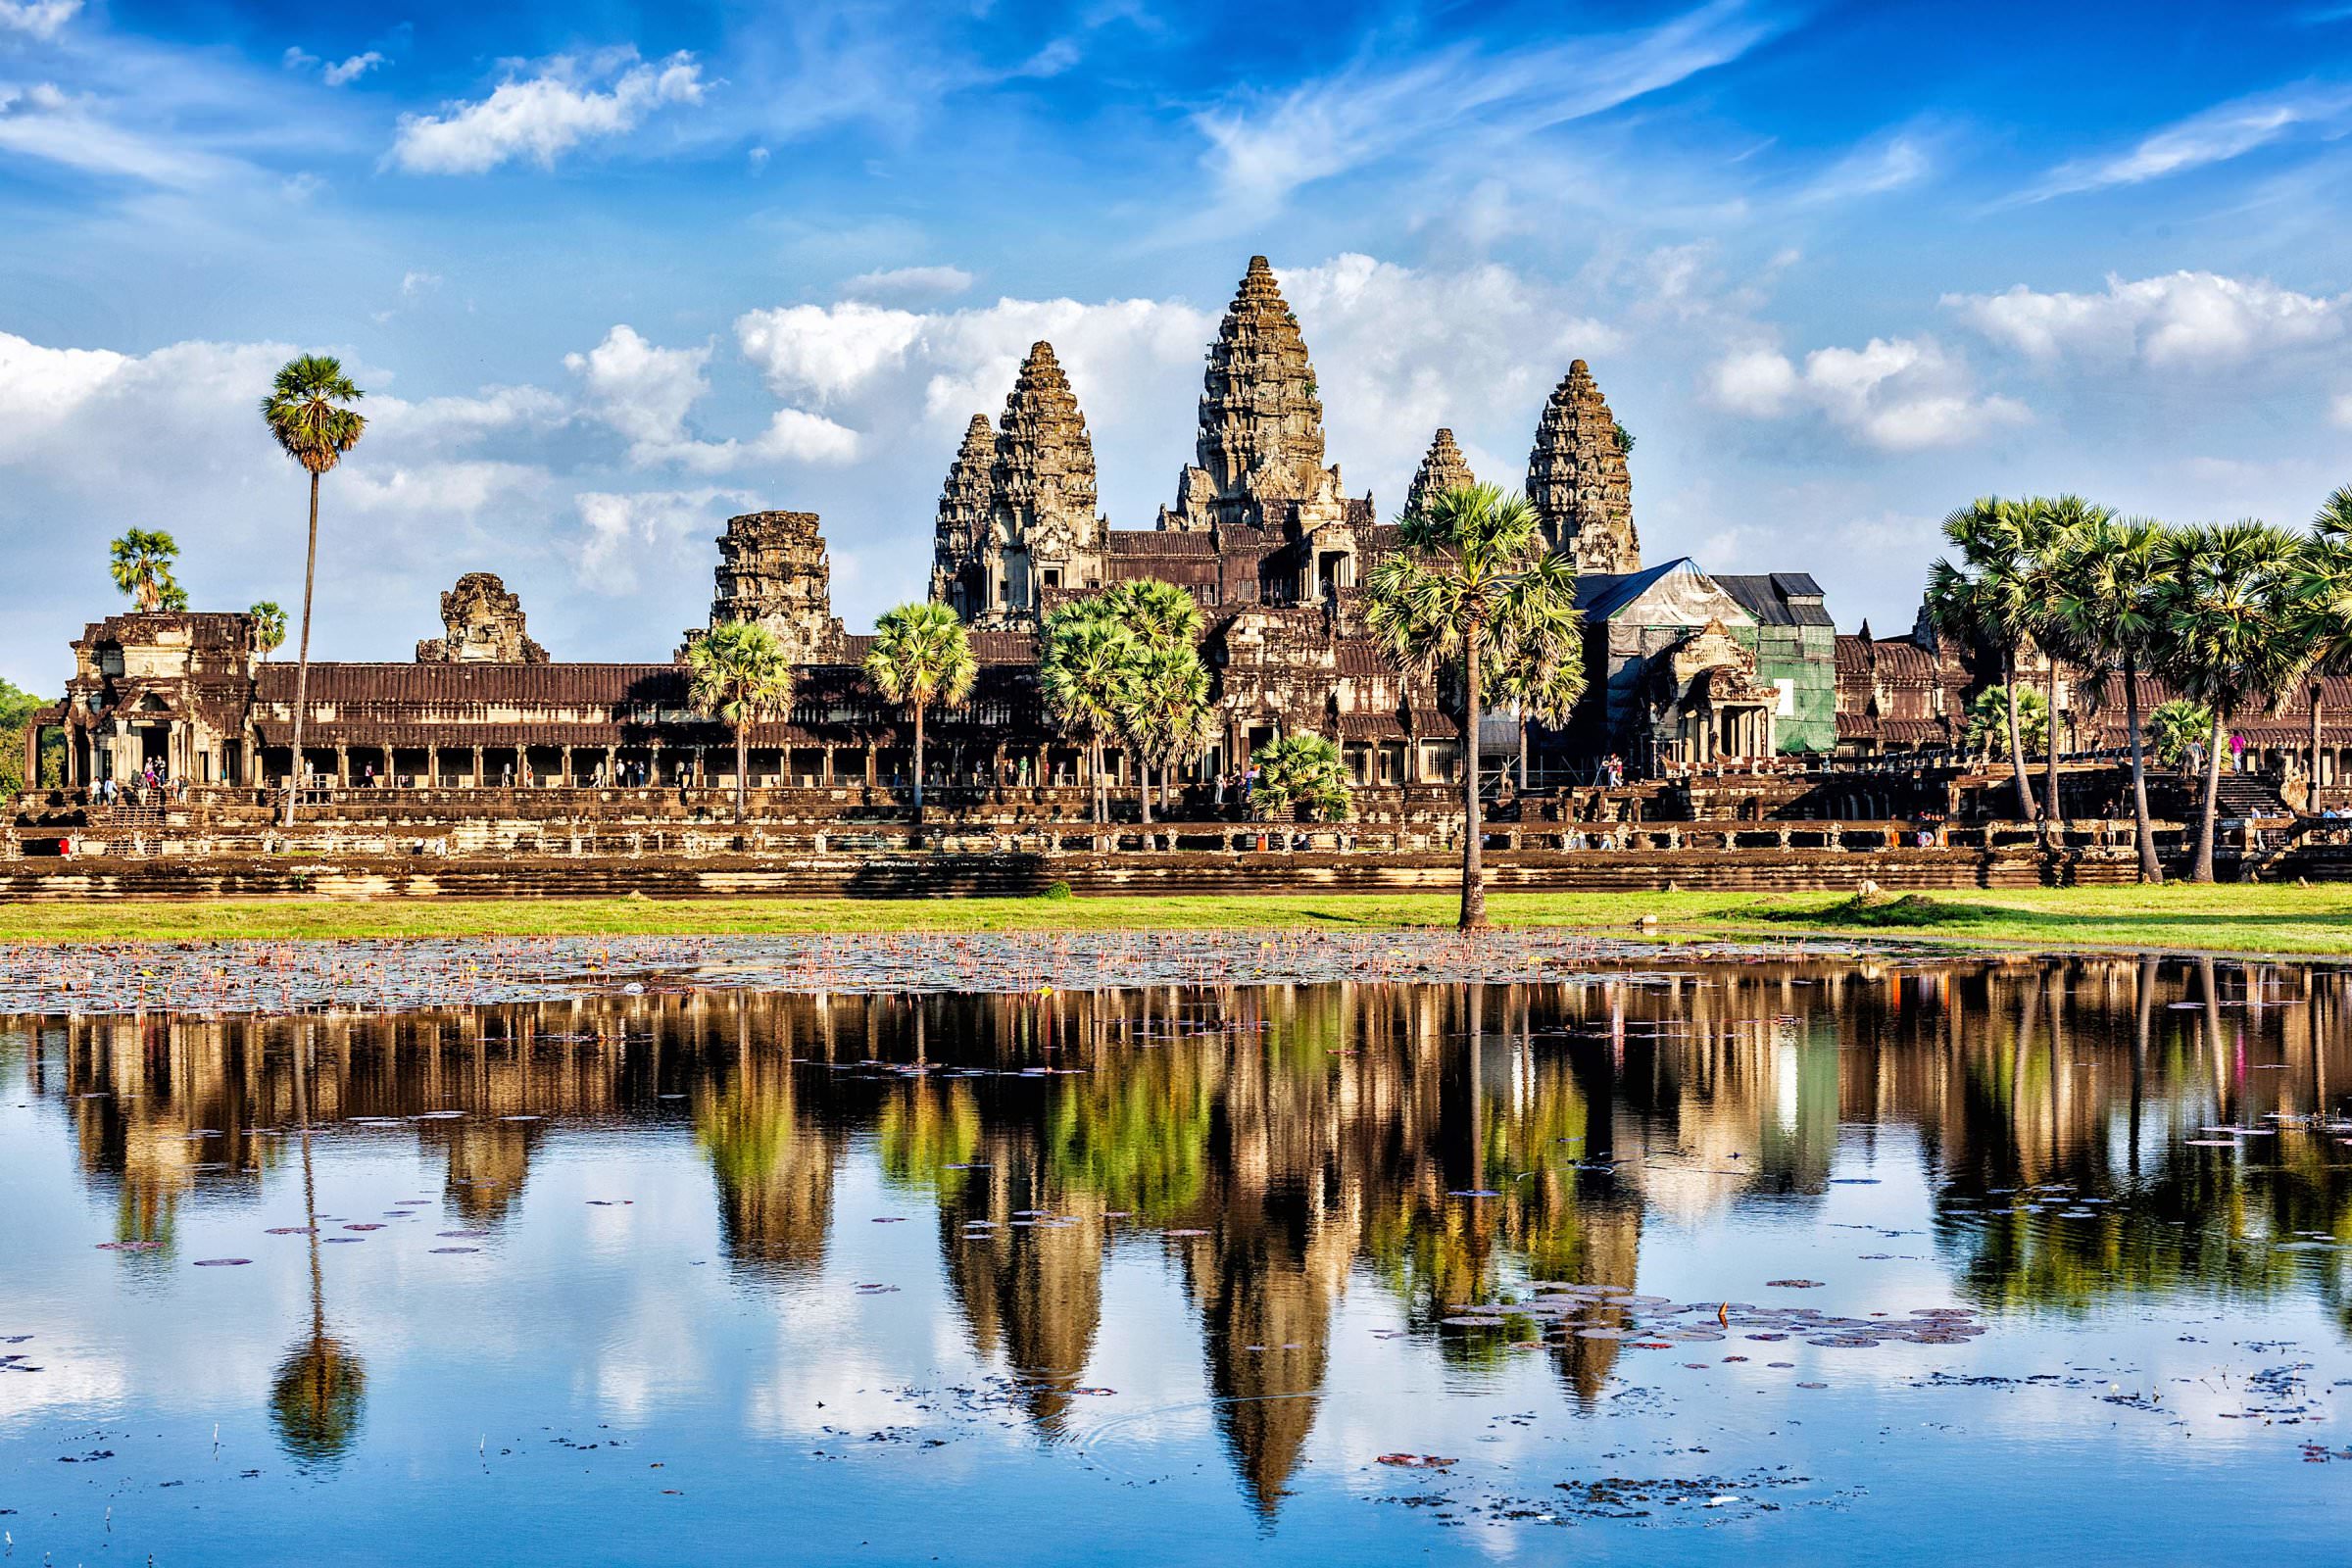 Economical Travel: Your ultimate 5 night itinerary to Cambodia